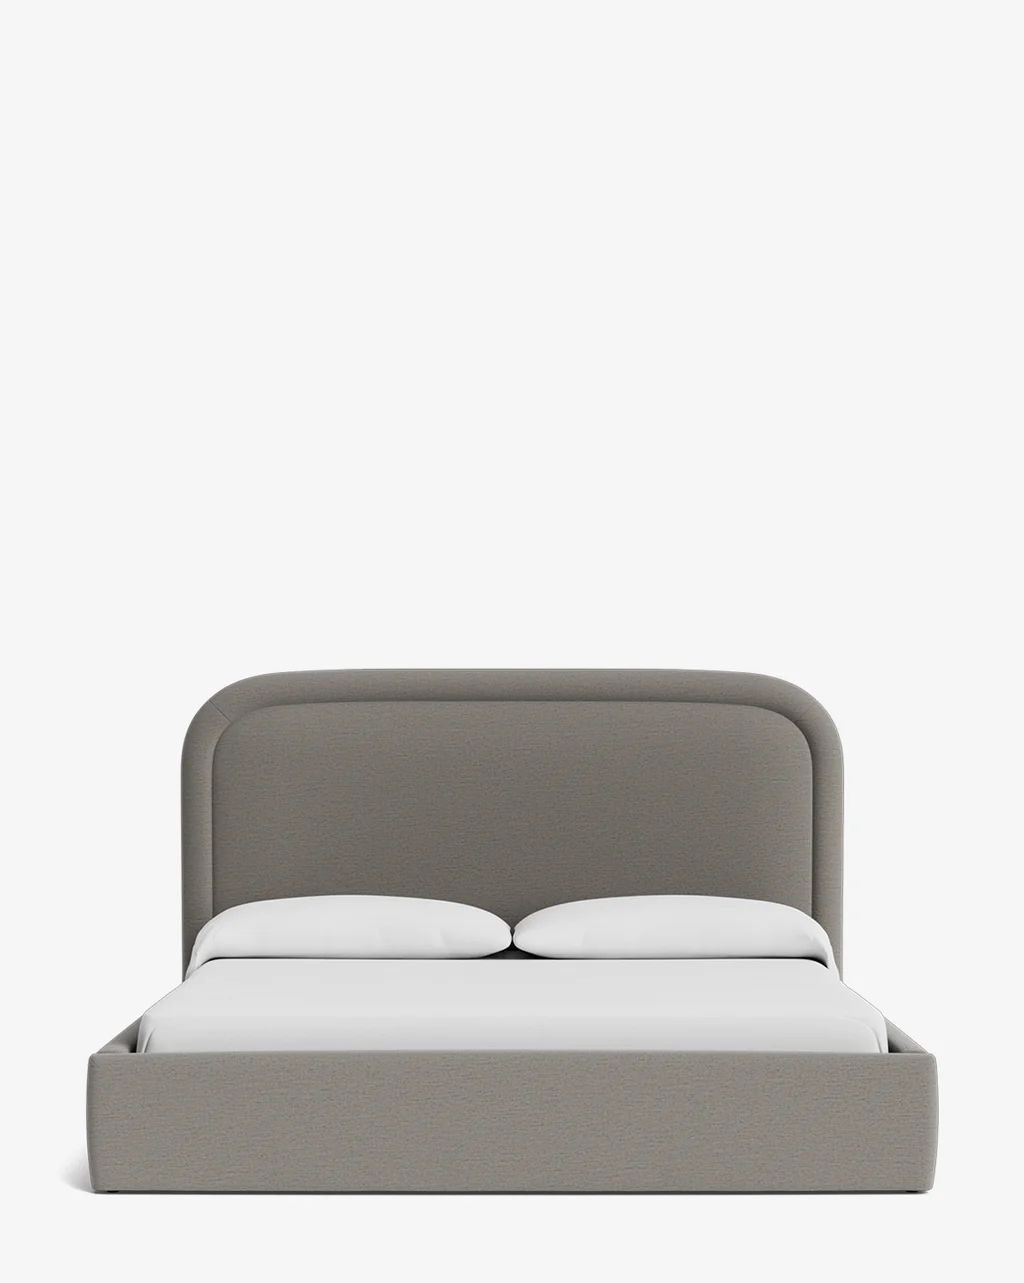 Selby Upholstered Bed | McGee & Co.